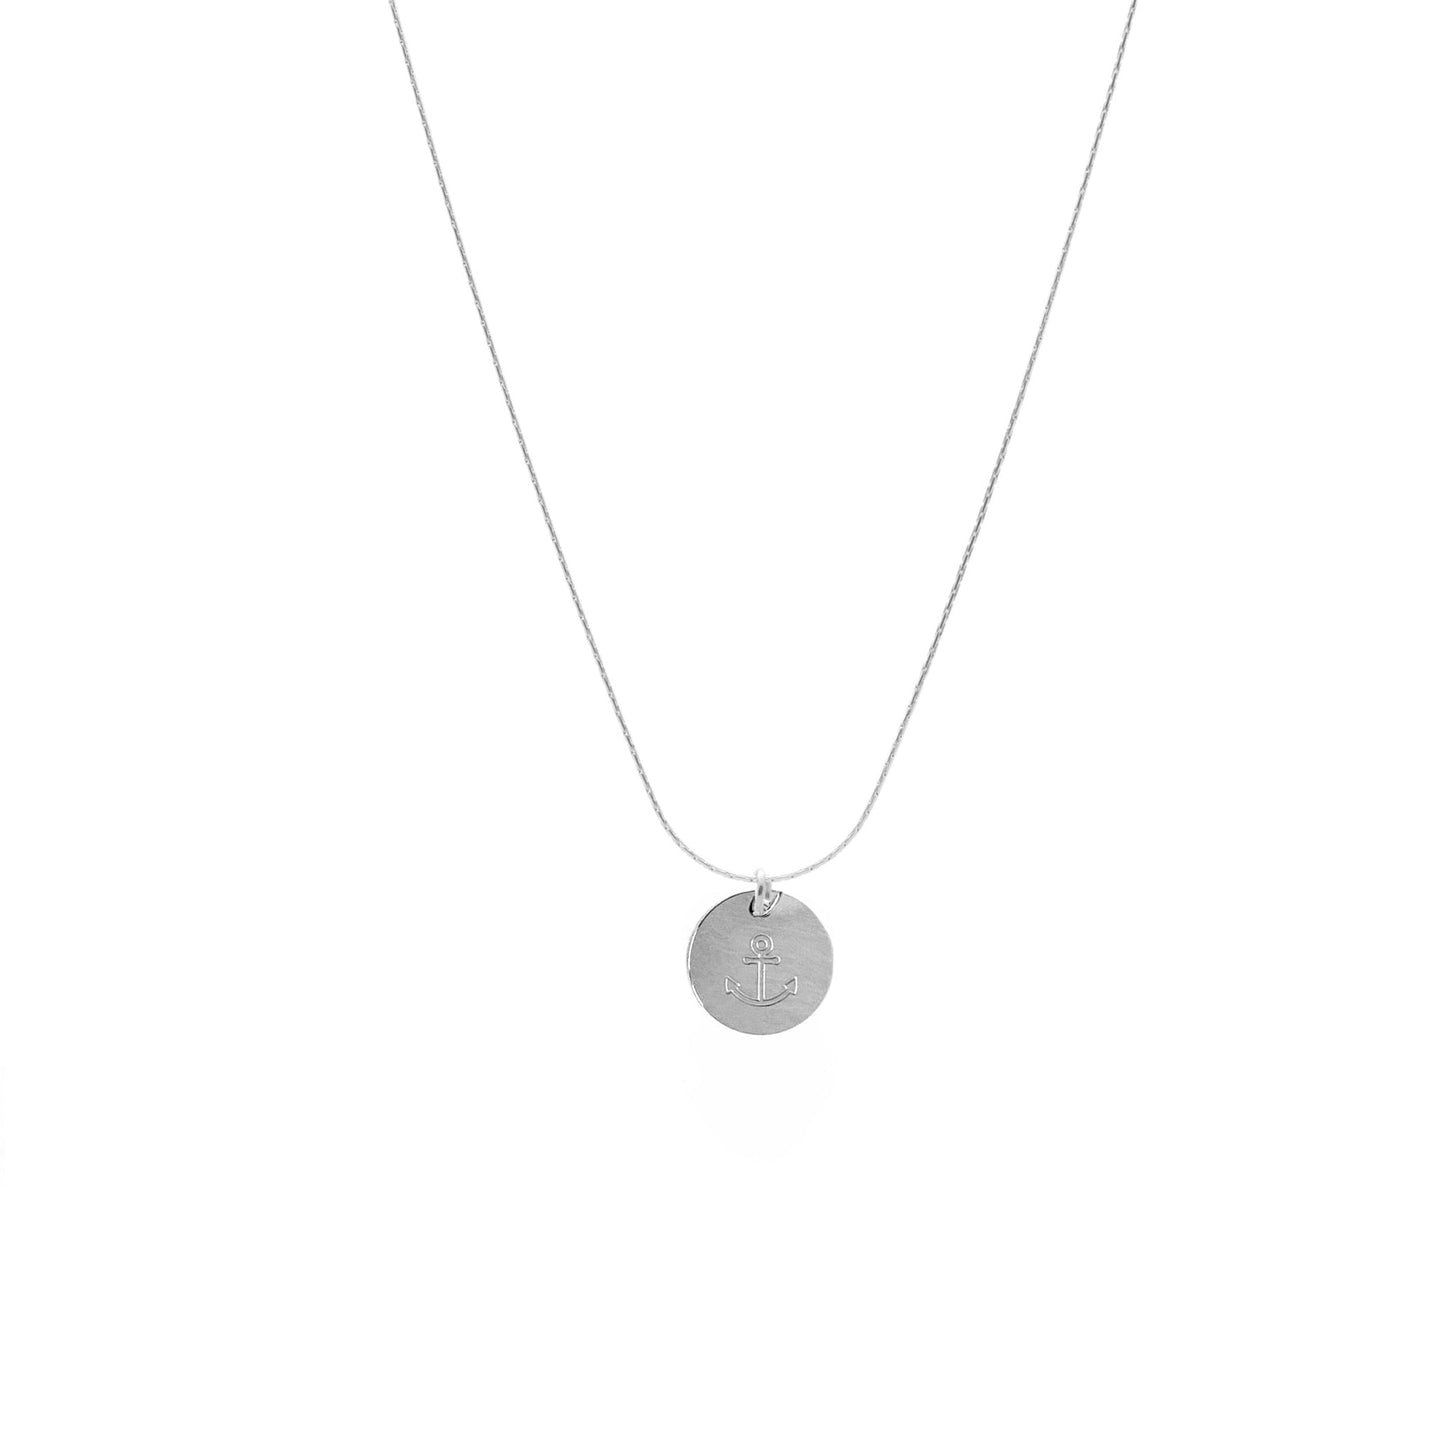 Salty Cali Lil' Tokens Necklace - Silver